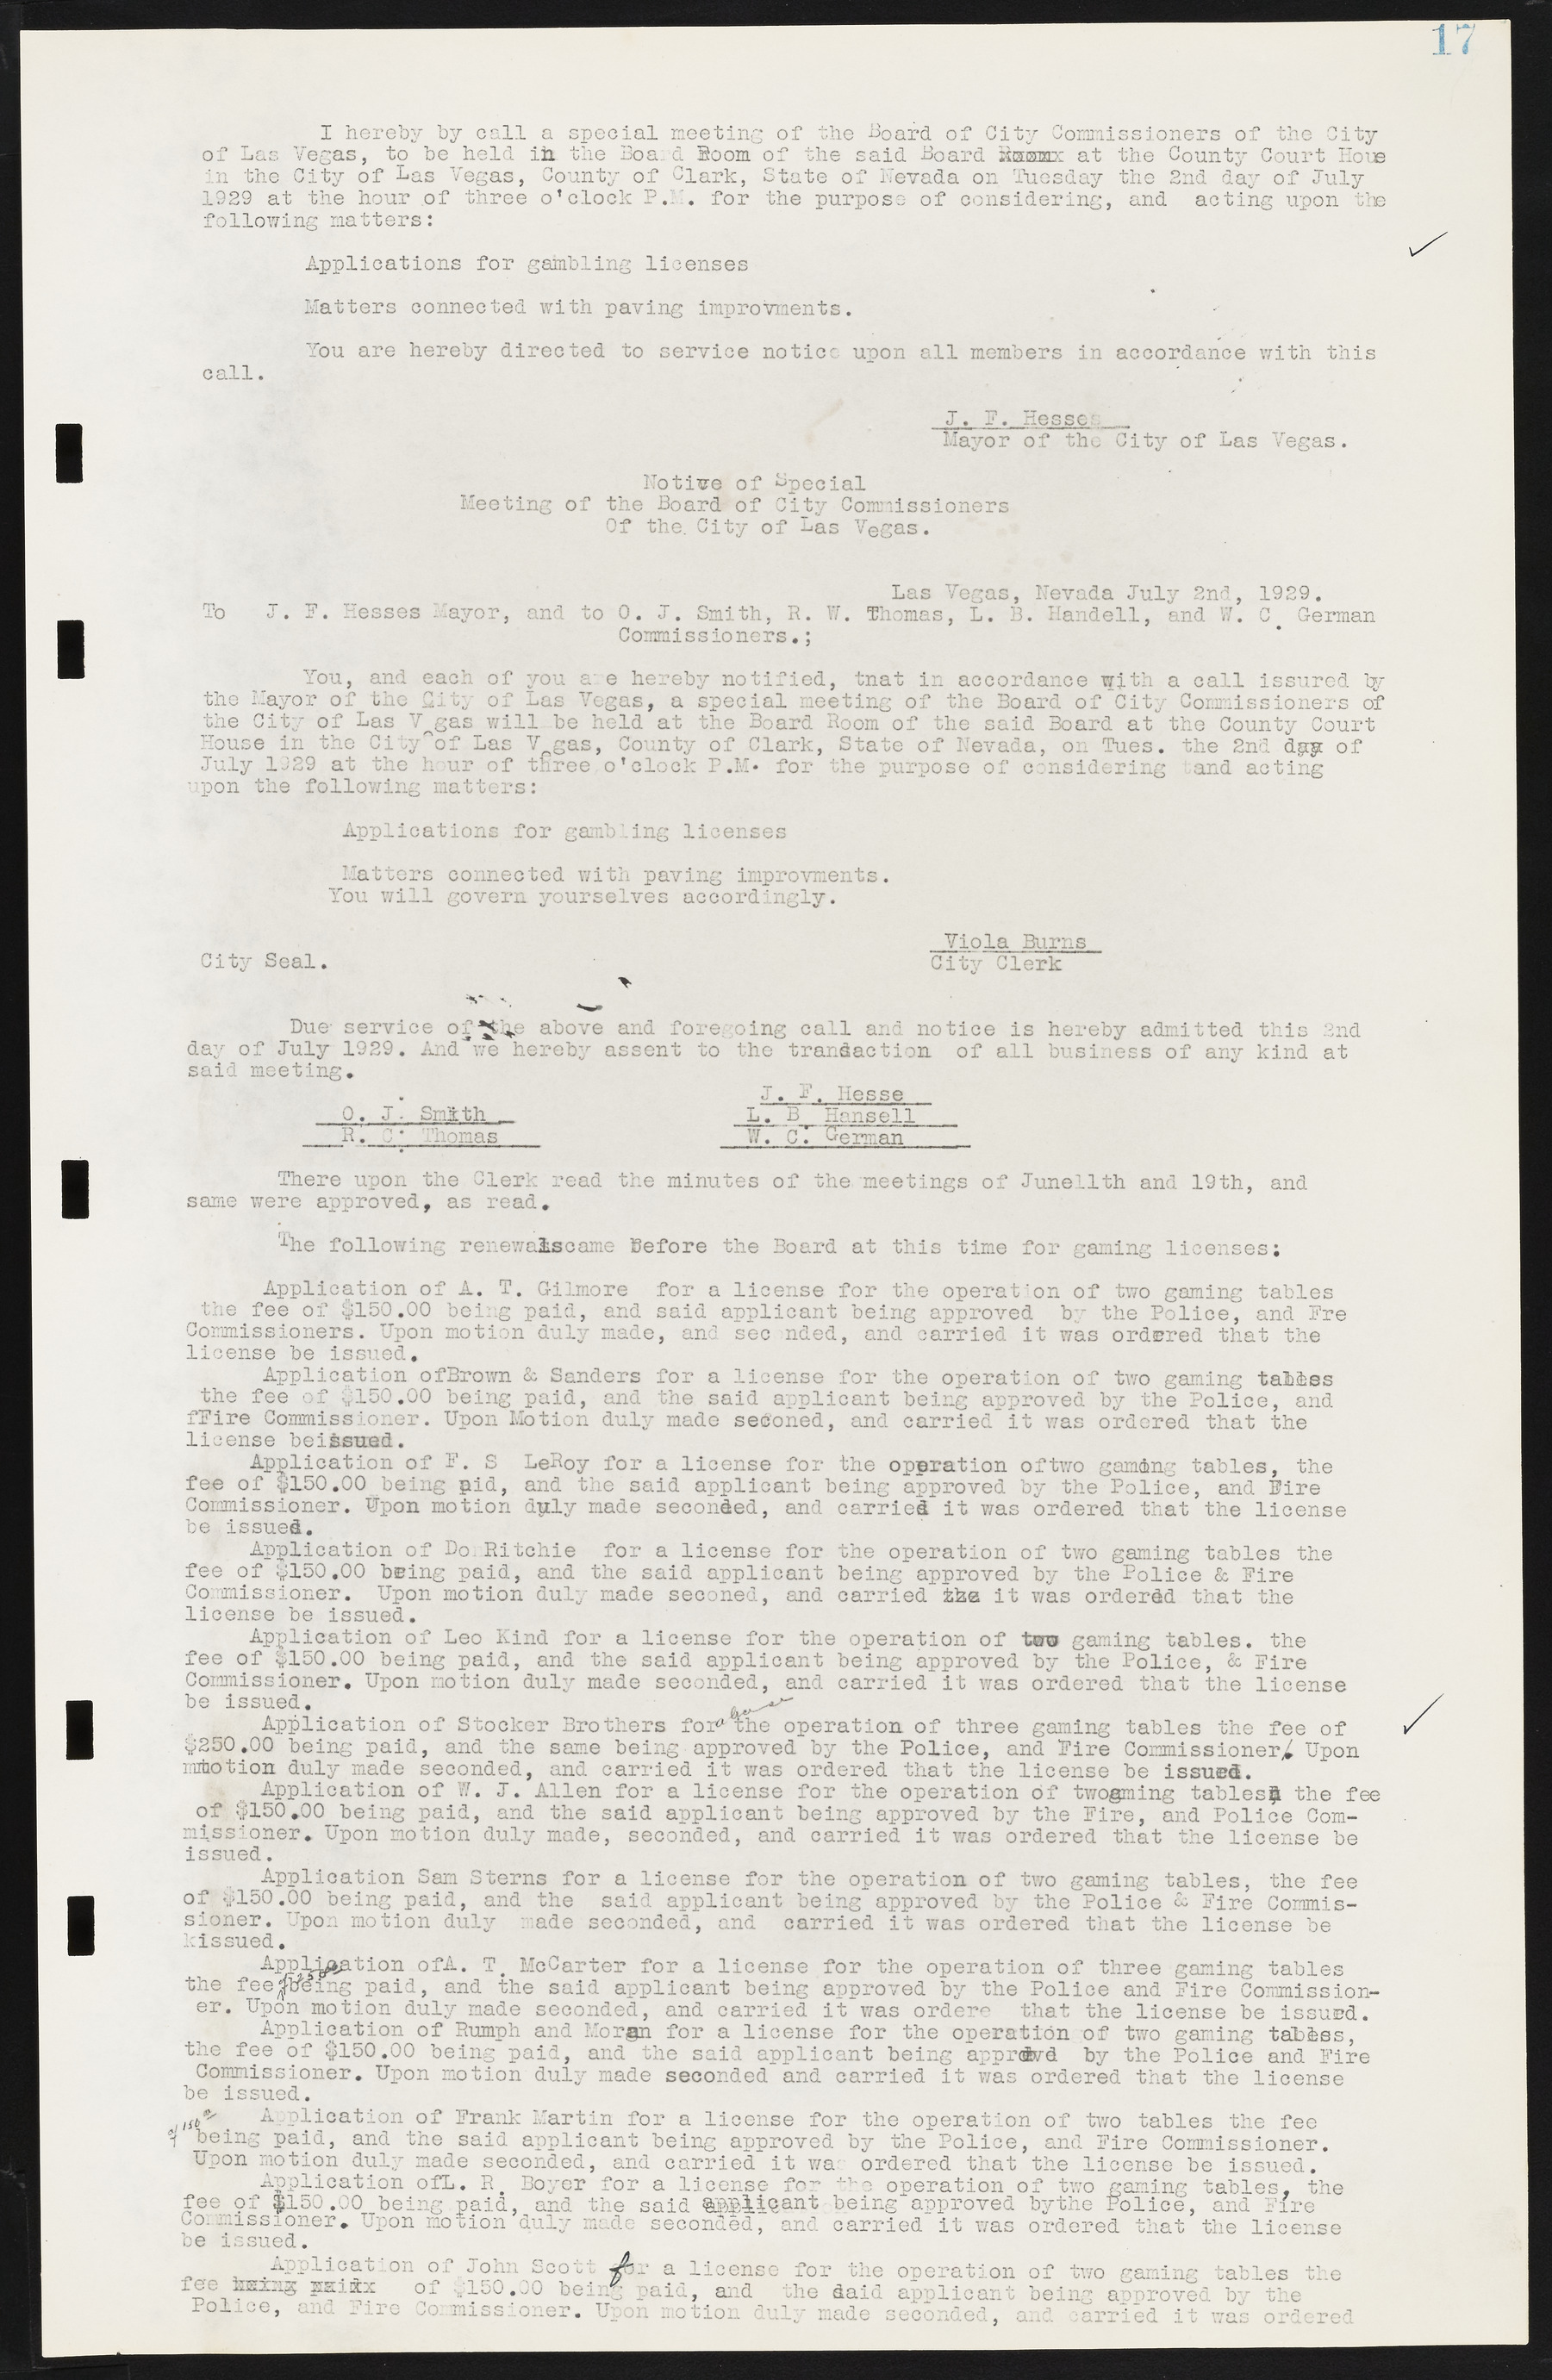 Las Vegas City Commission Minutes, May 14, 1929 to February 11, 1937, lvc000003-23